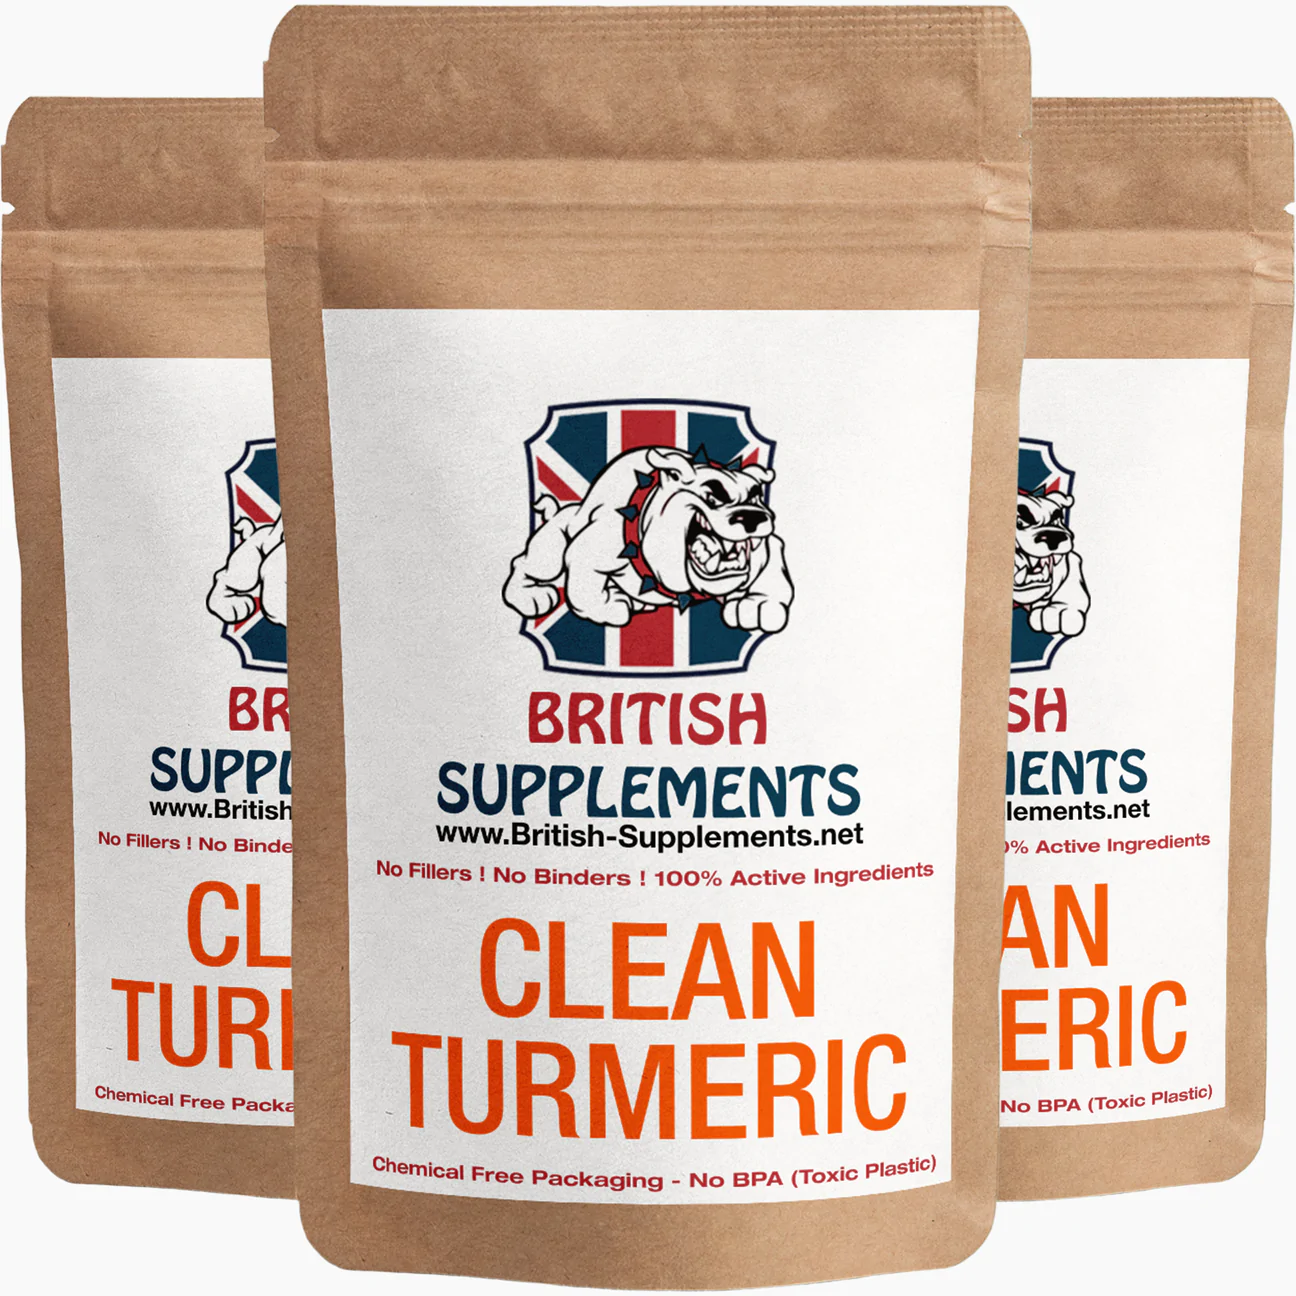 certain supplements like turmeric can help buttock pain